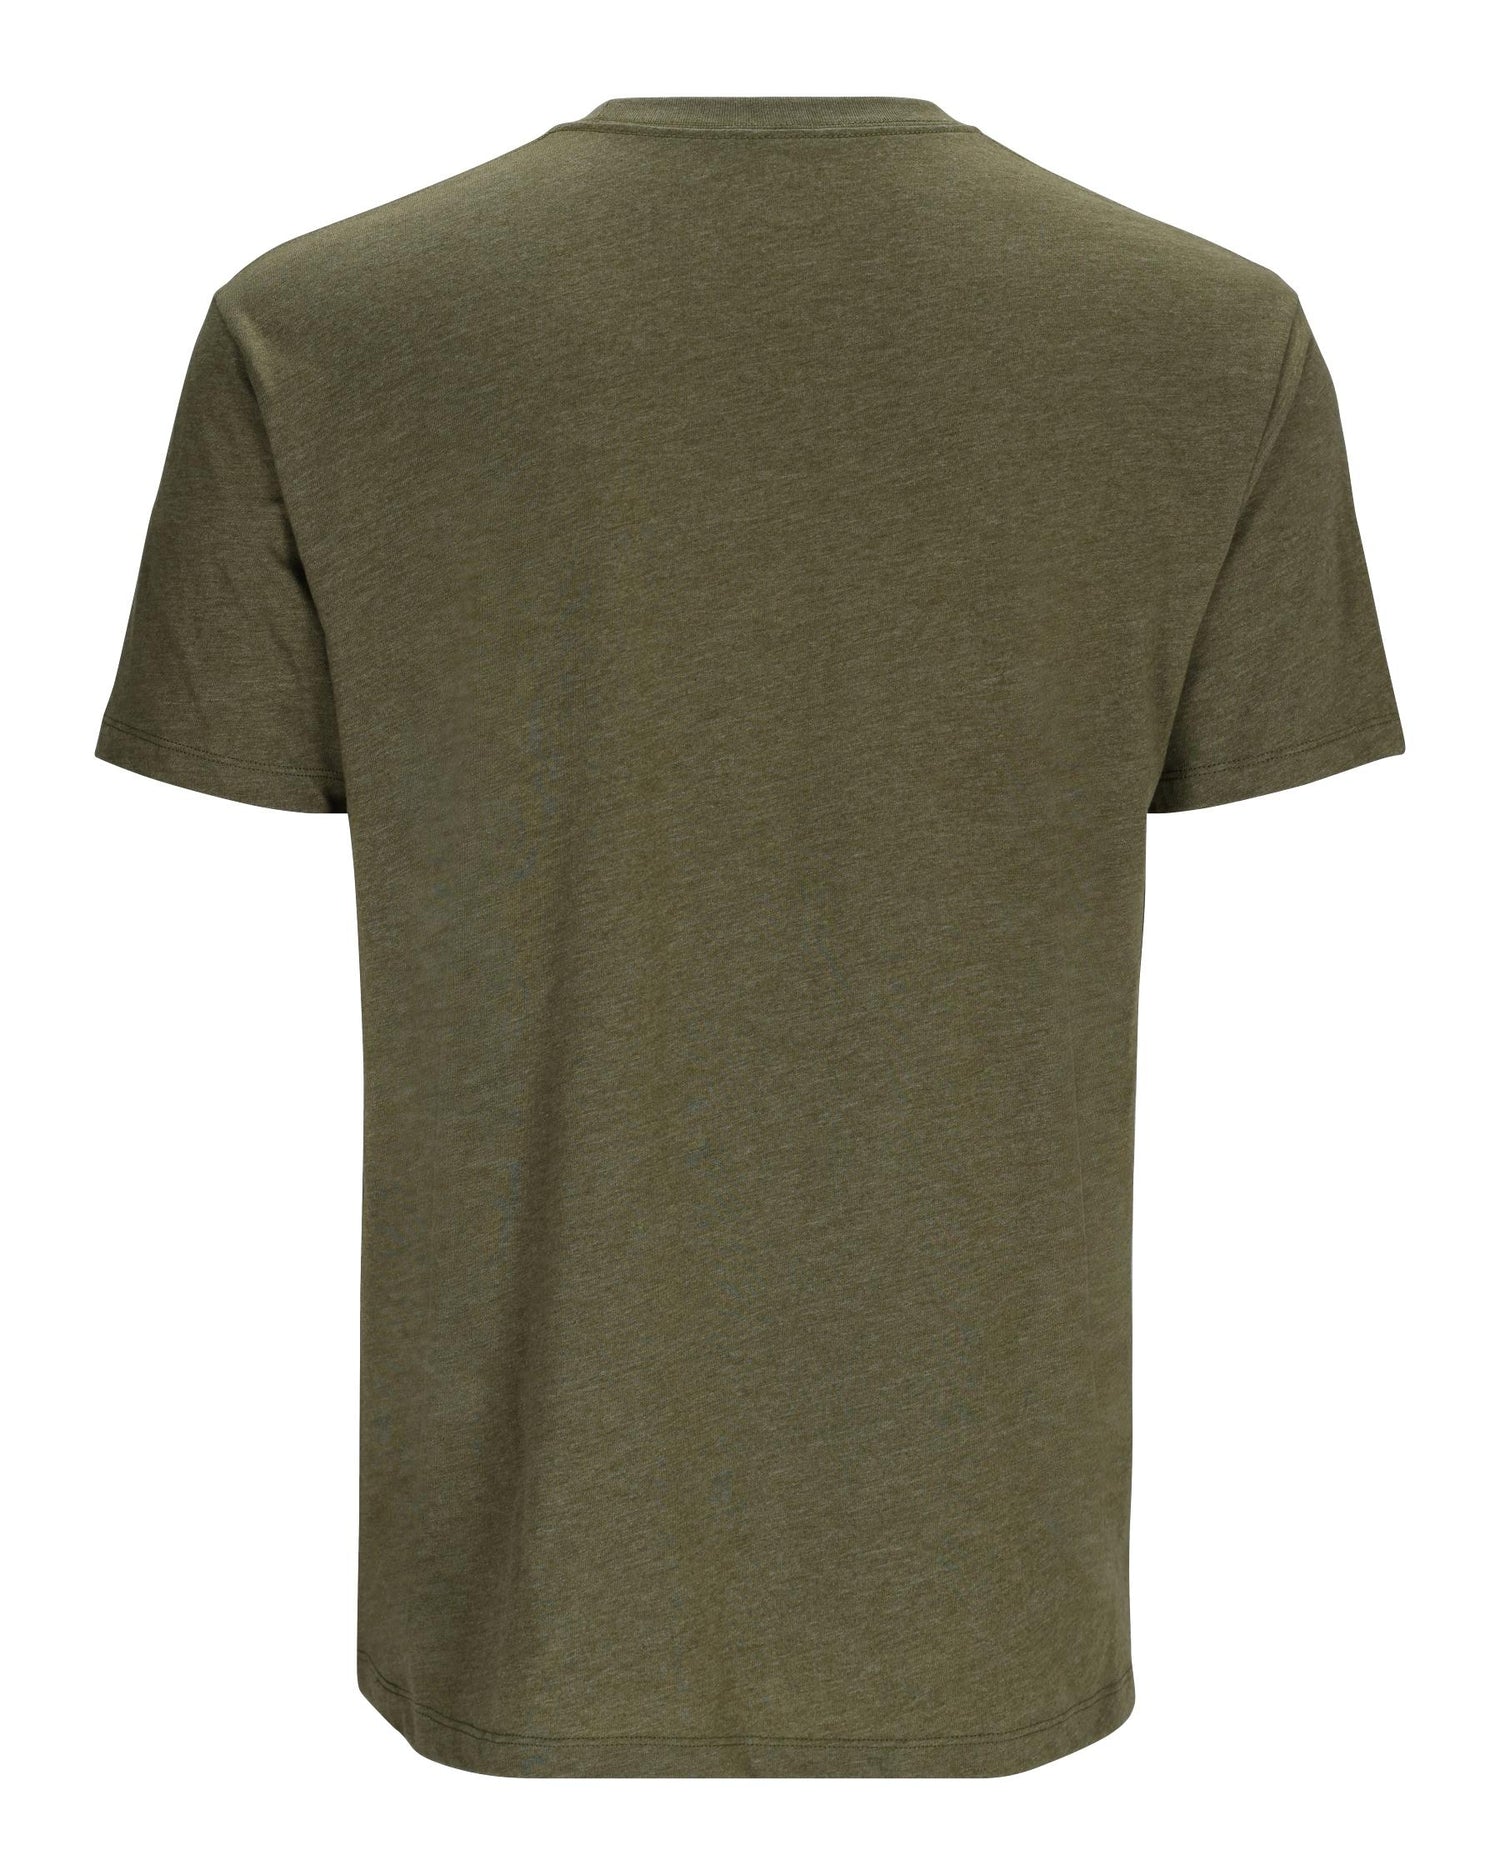 14095-914-Fly-Patch-T-Shirt-Mannequin-S24-Back -rollover